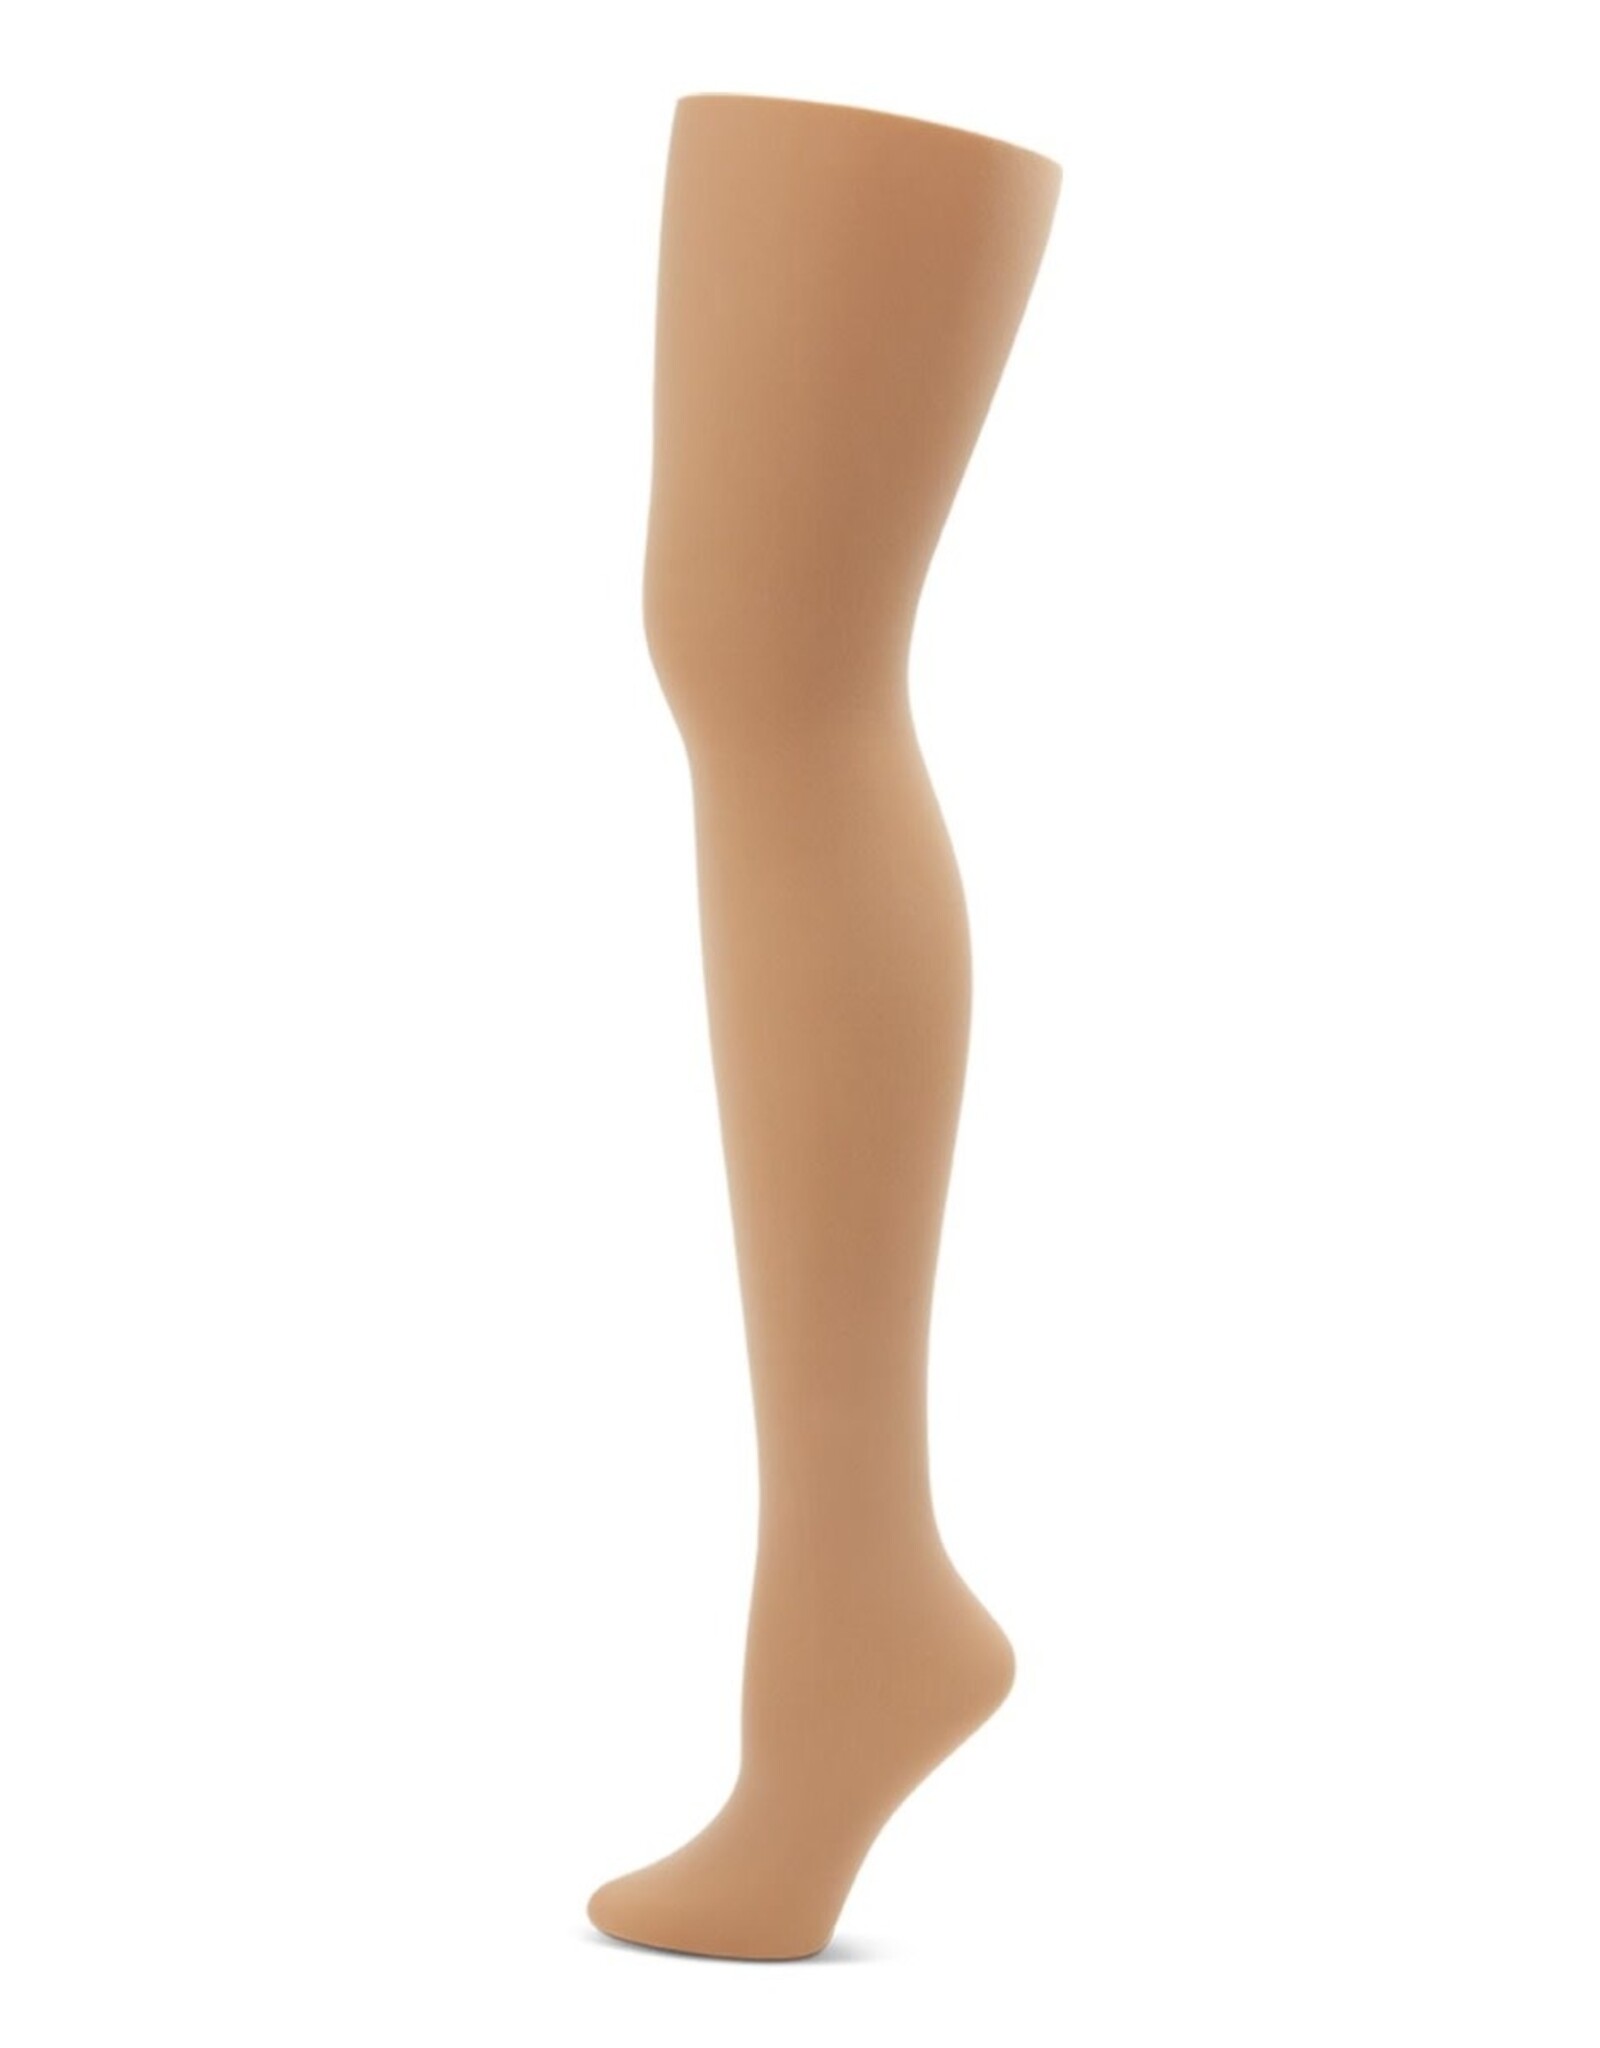 Capezio / Bunheads Toddler Studio Basic Footed Tights (1825X) - 2-6